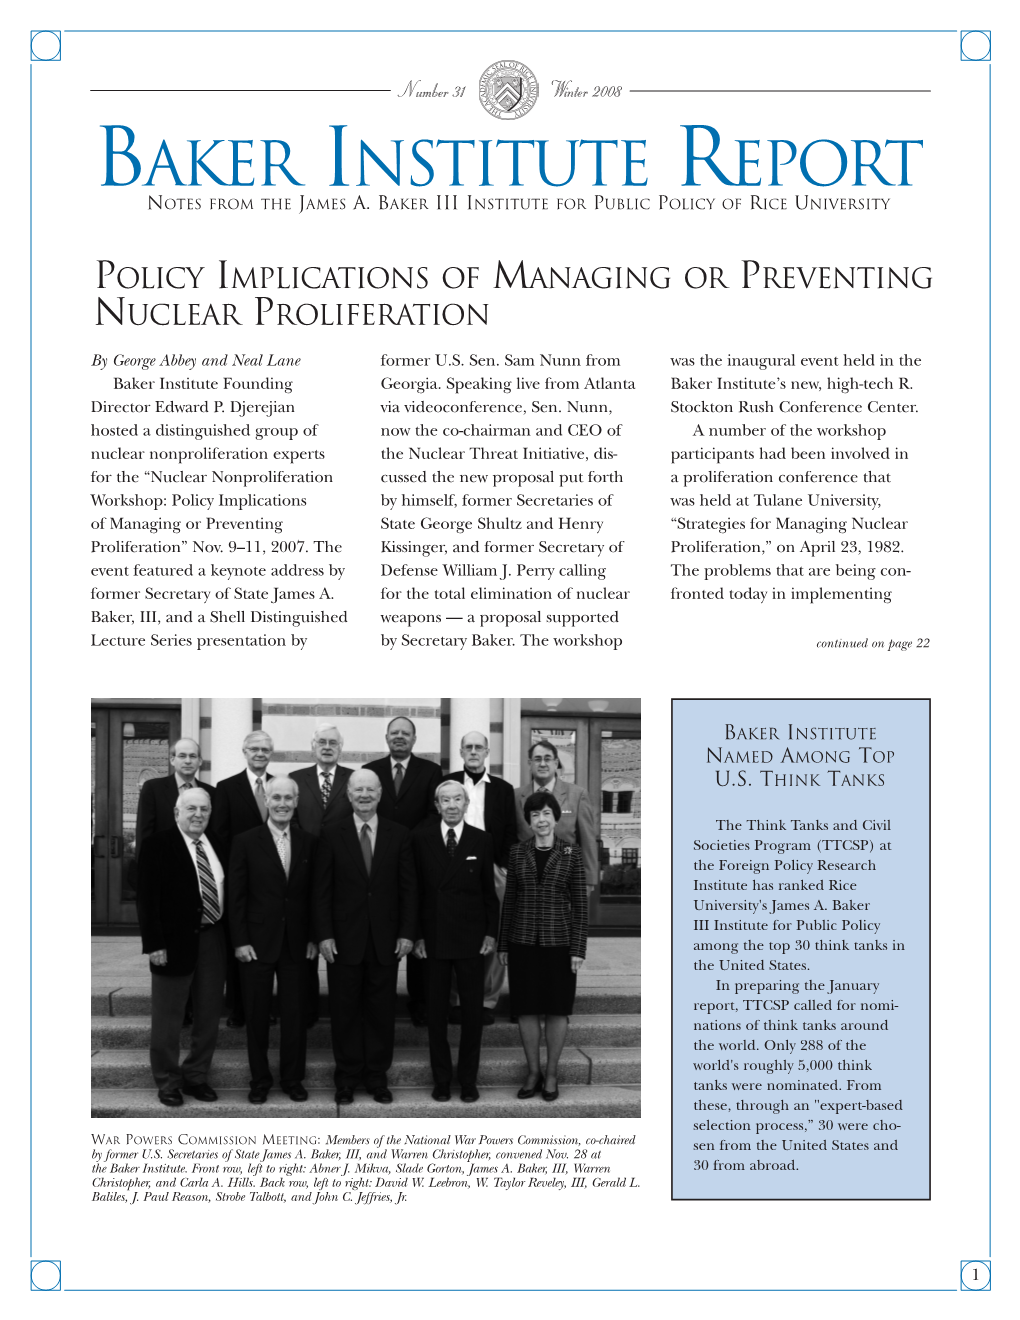 Baker Institute Report Is Printed on Recycled John W